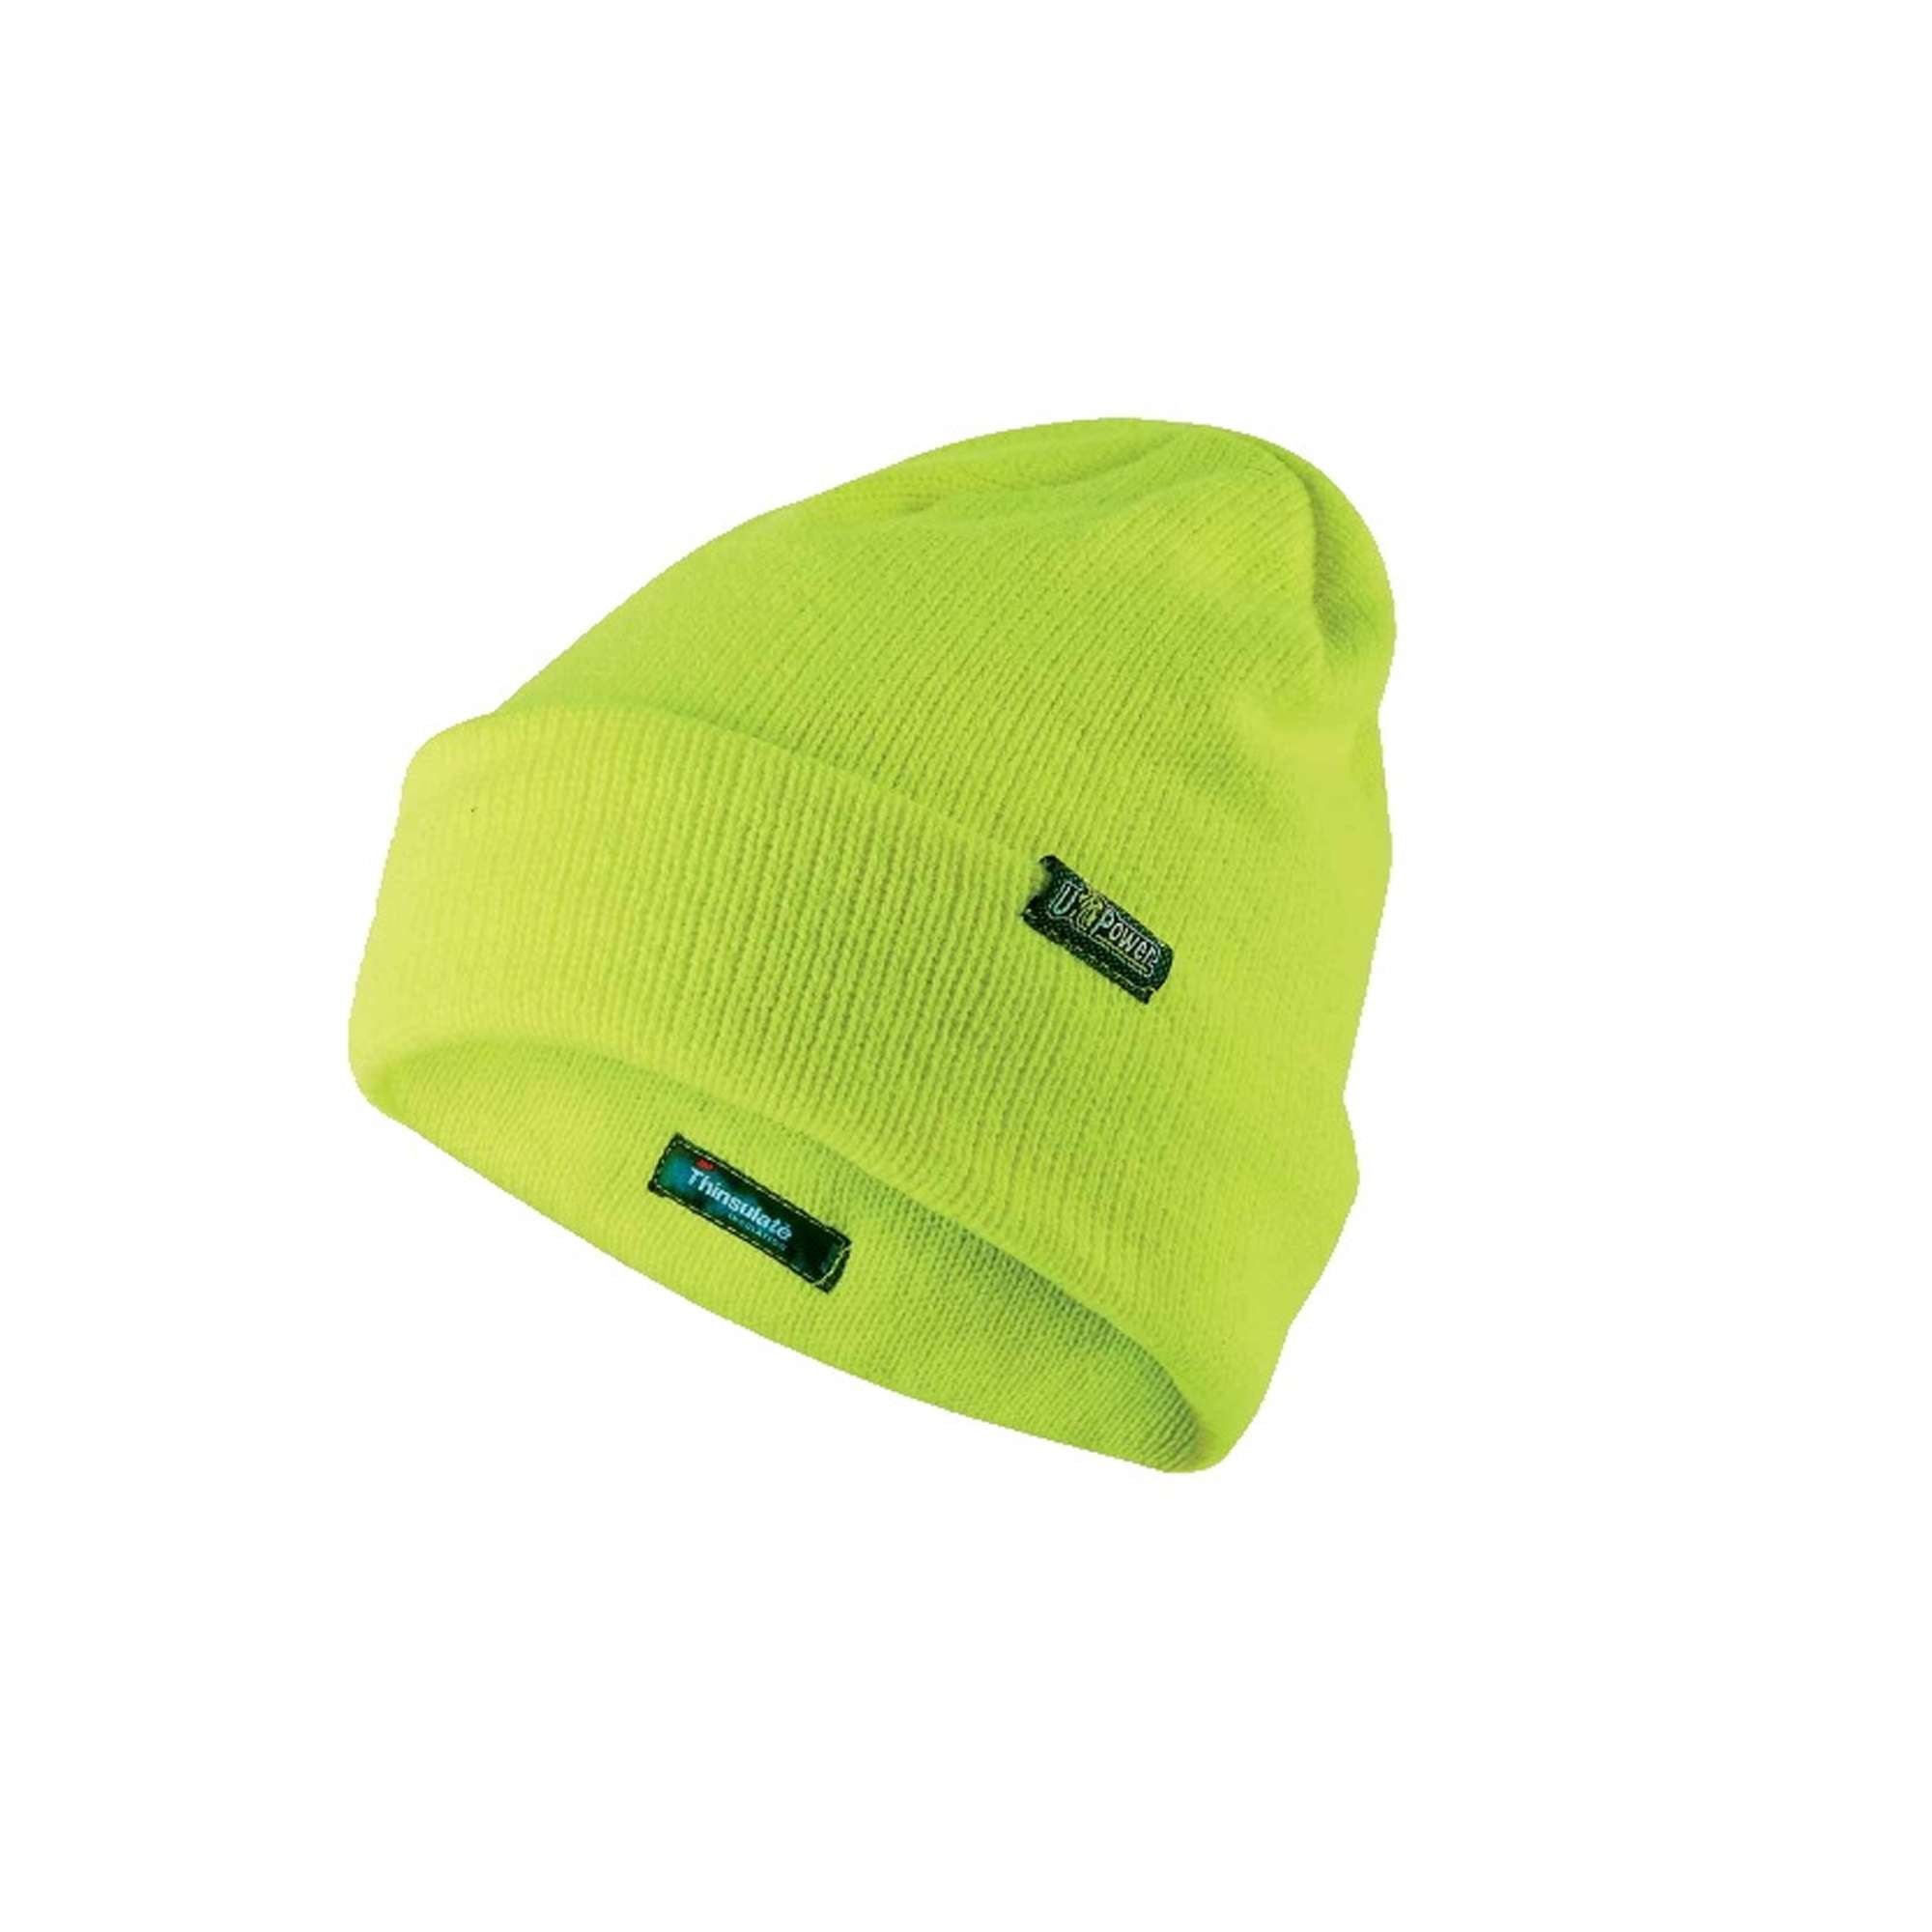 Thinsulate-coated winter cap one yellow fluo U-Power